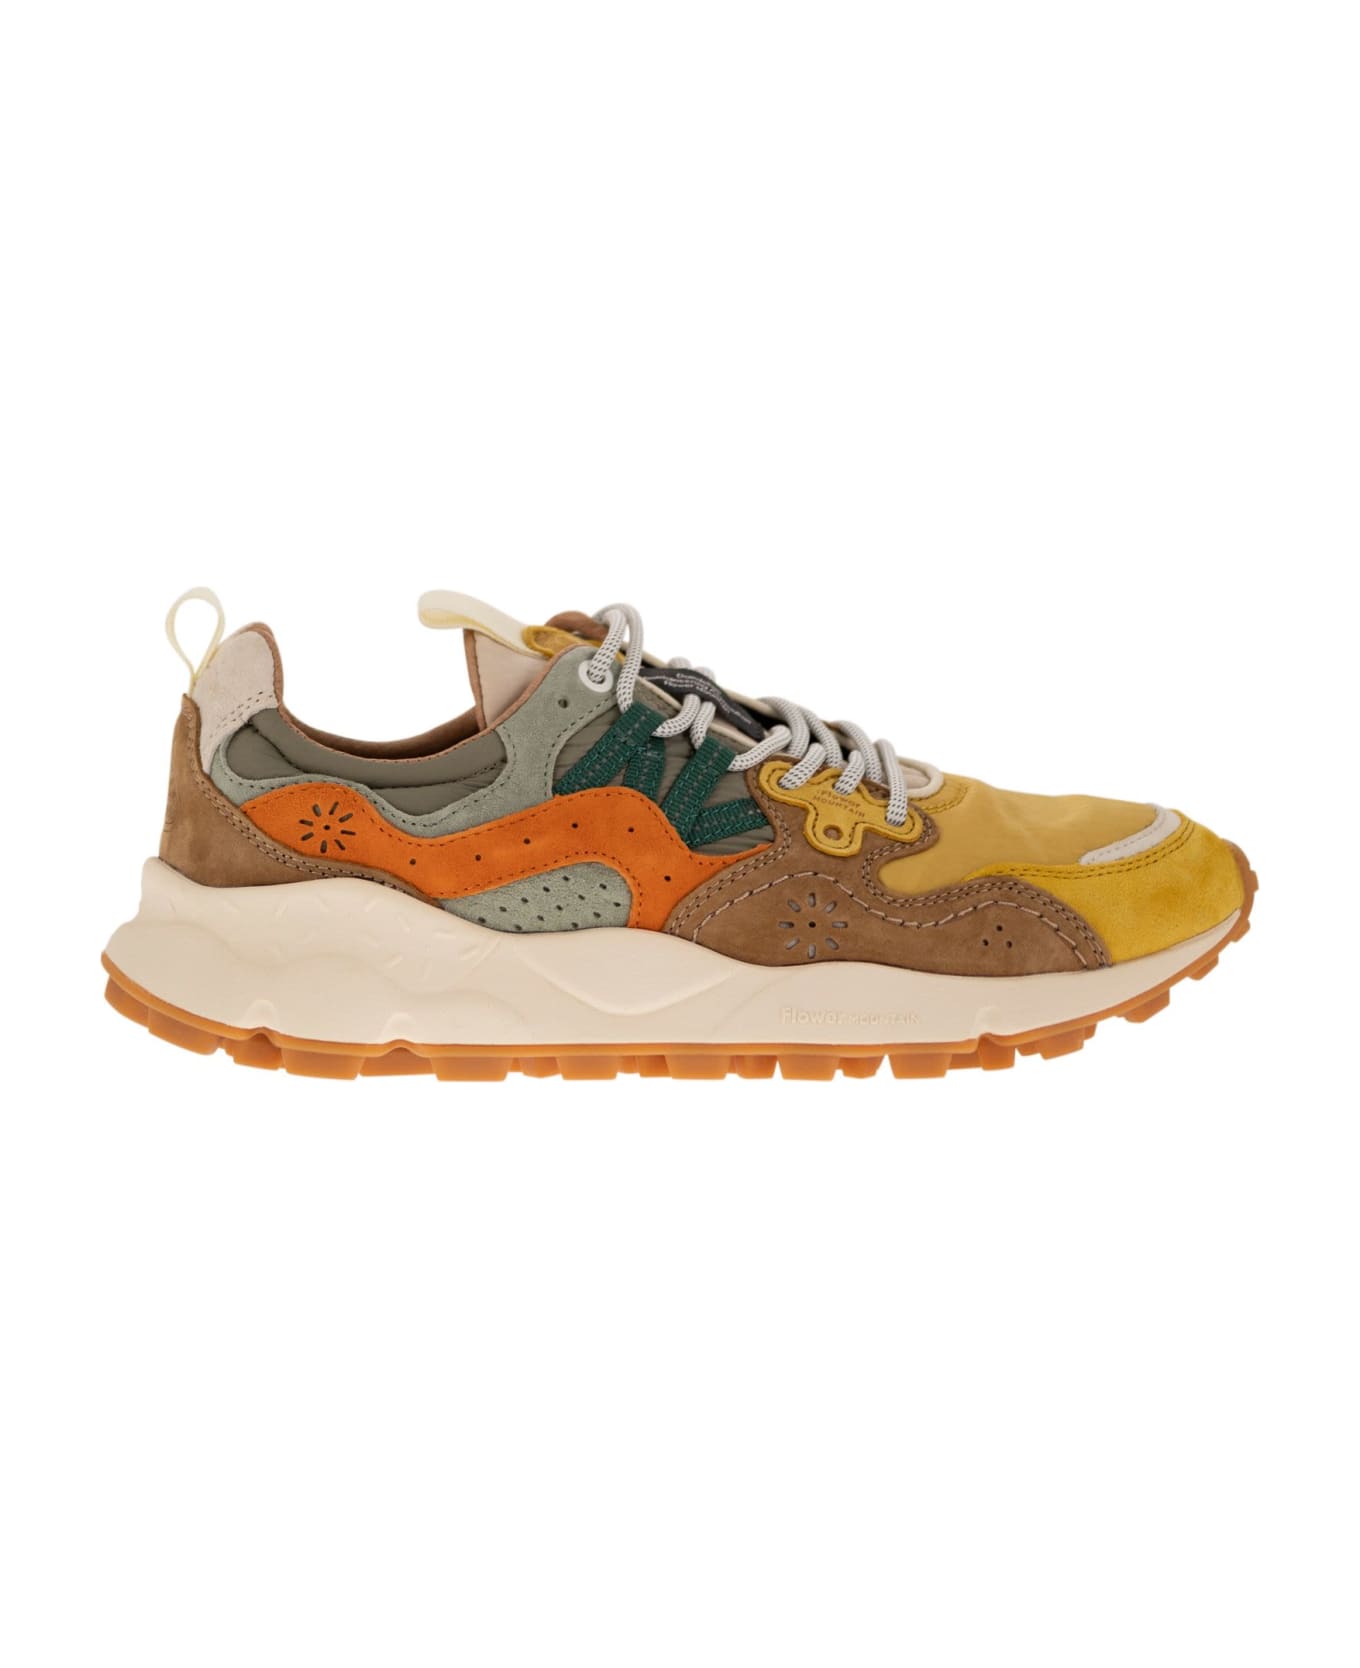 Flower Mountain Yamano 3 - Sneakers In Suede And Technical Fabric - Orange/military